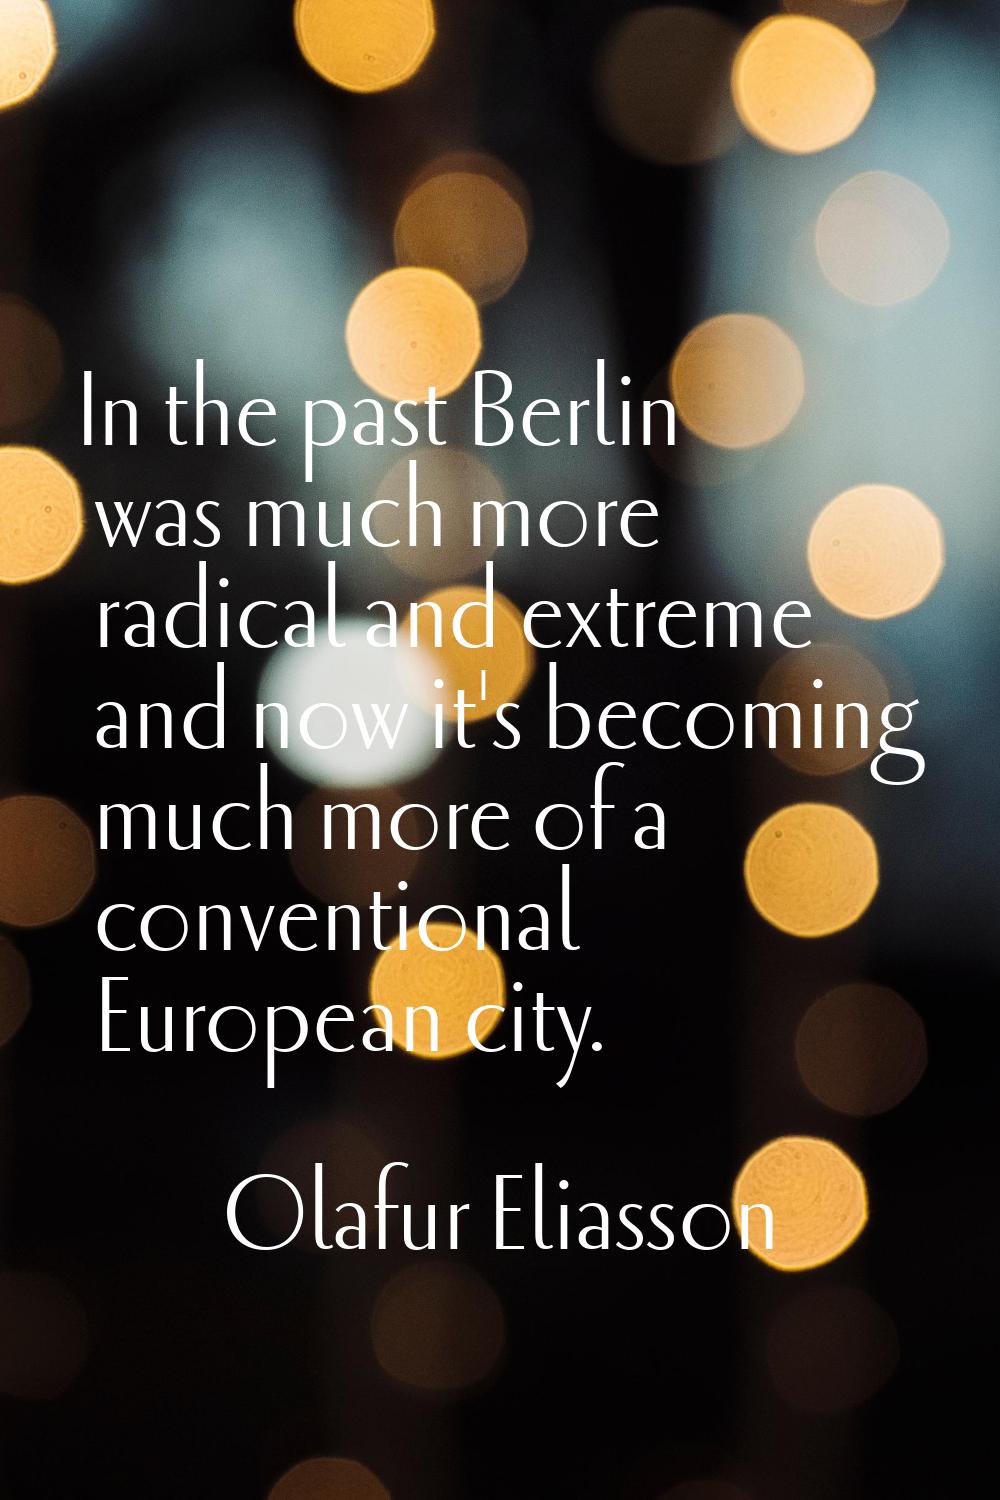 In the past Berlin was much more radical and extreme and now it's becoming much more of a conventio